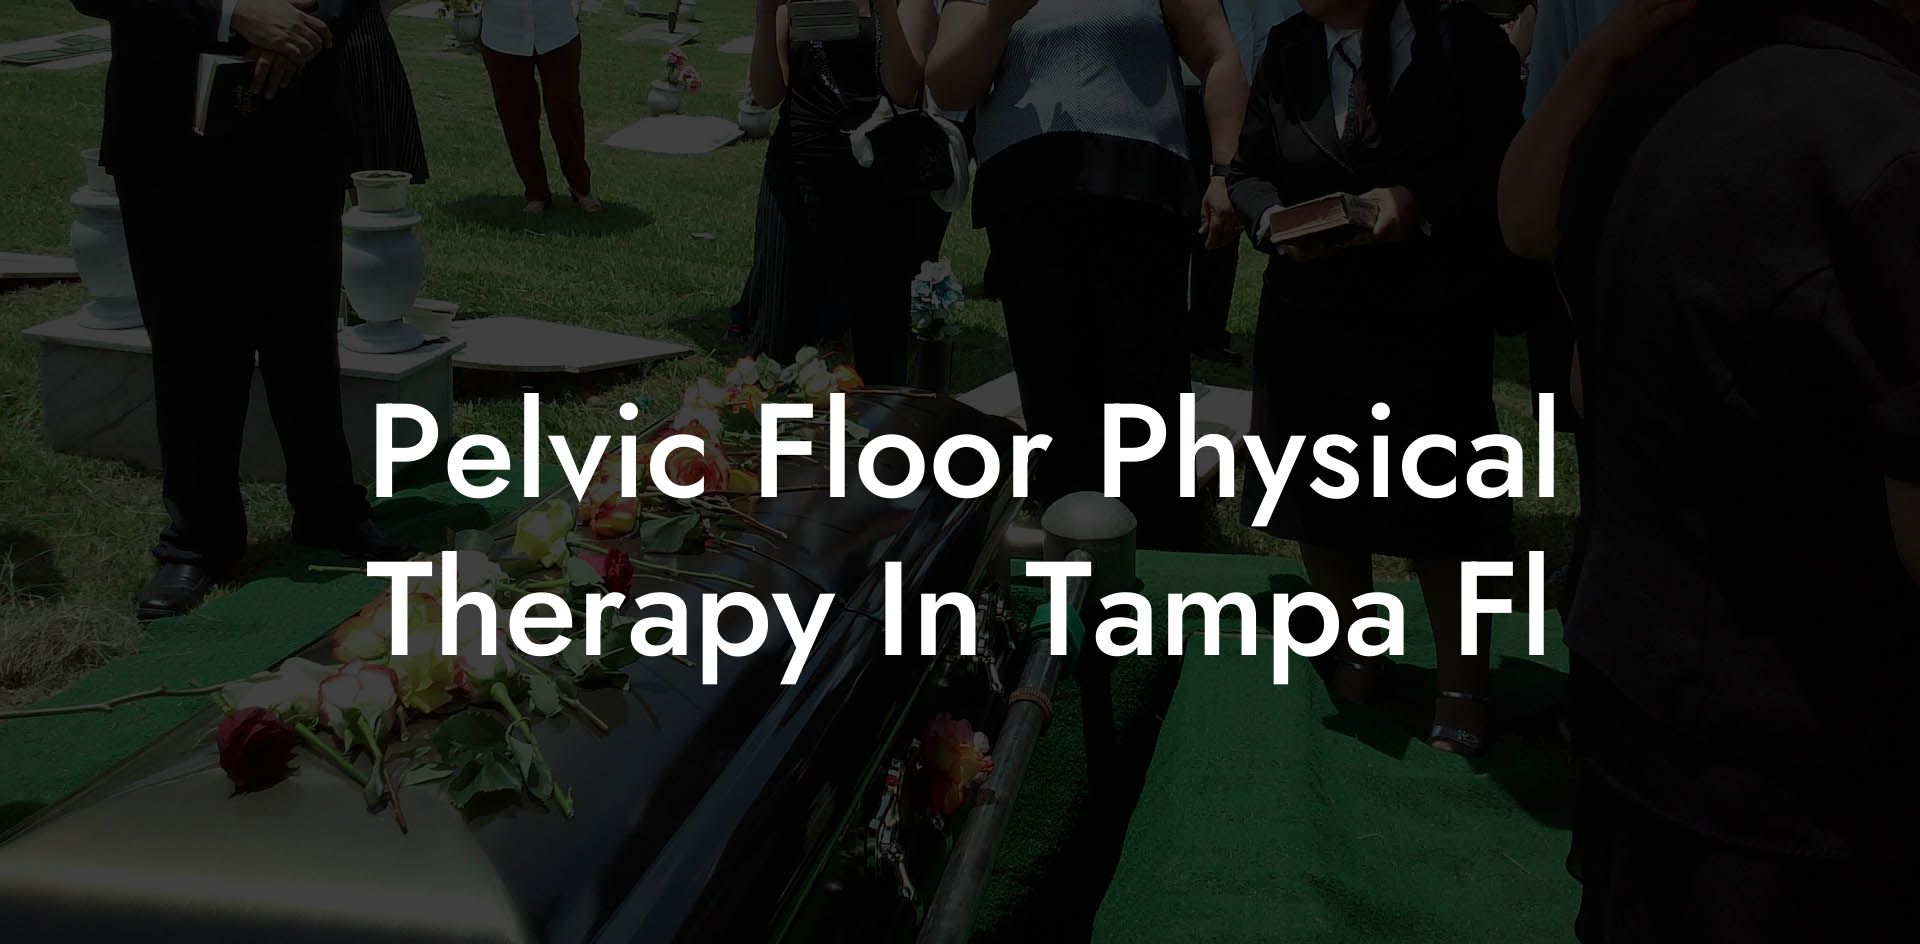 Pelvic Floor Physical Therapy In Tampa Fl